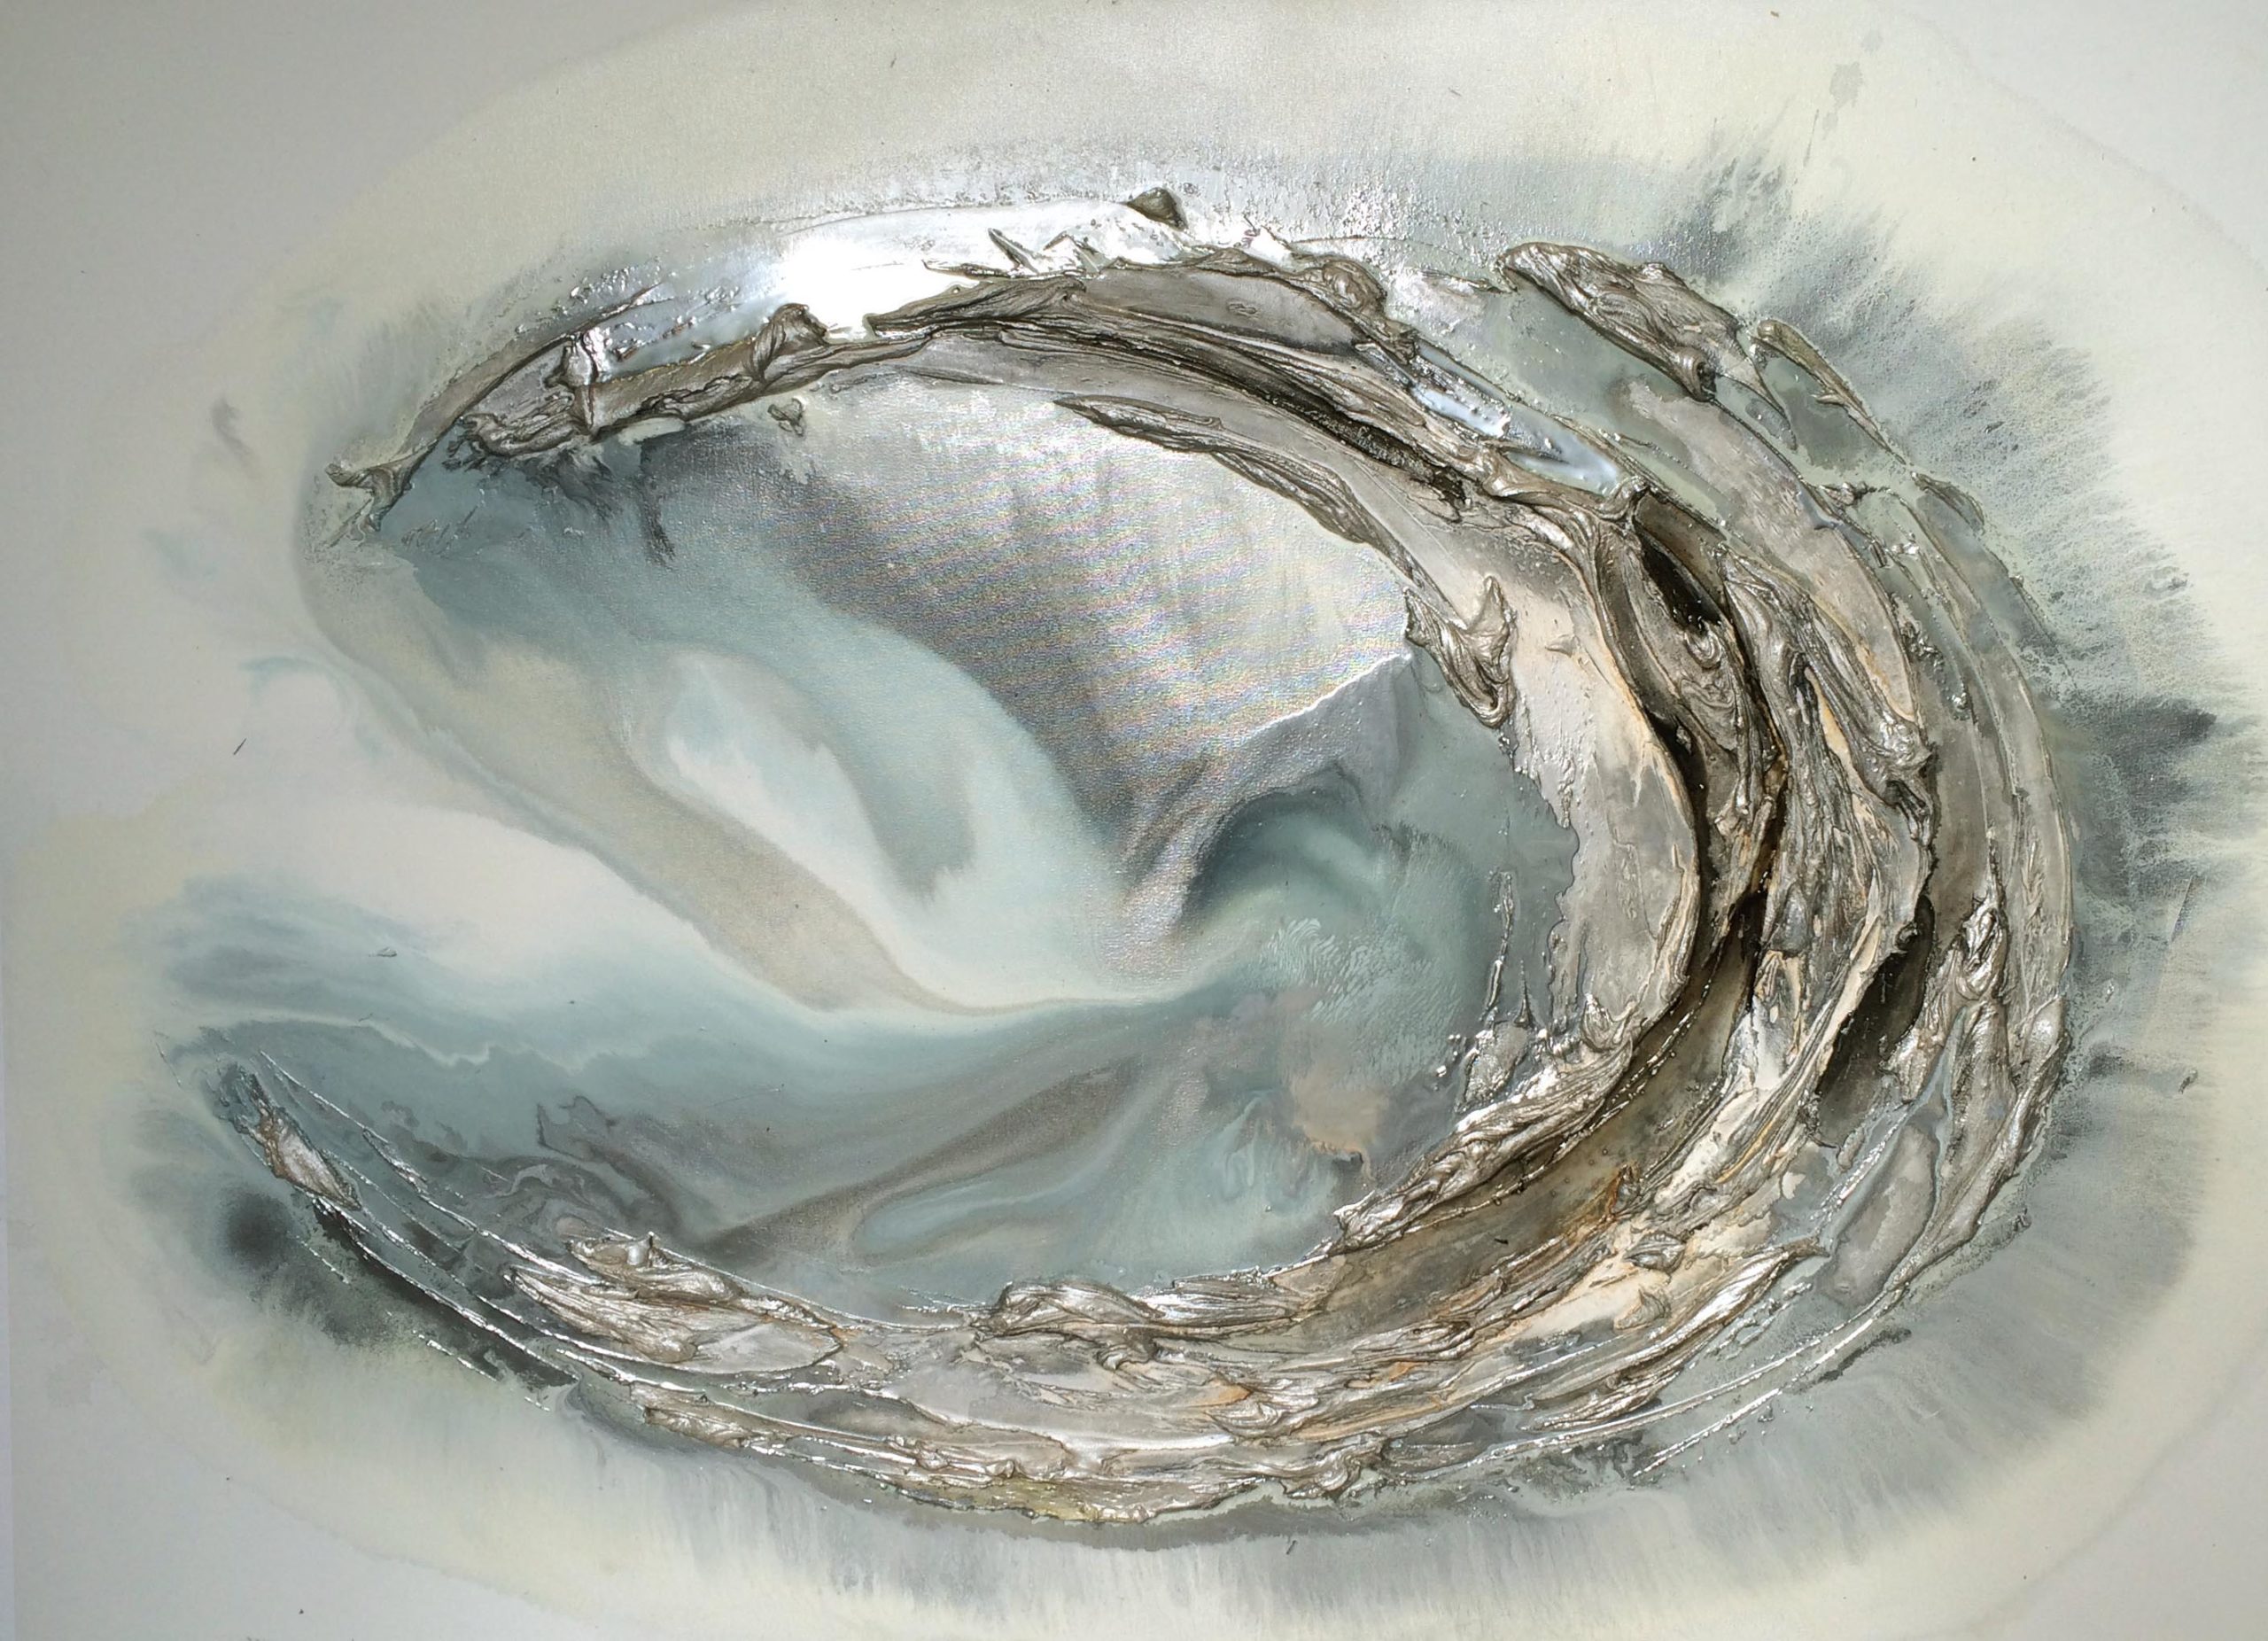 Vicky Sanders Oyster Series - Blue Oyster #4